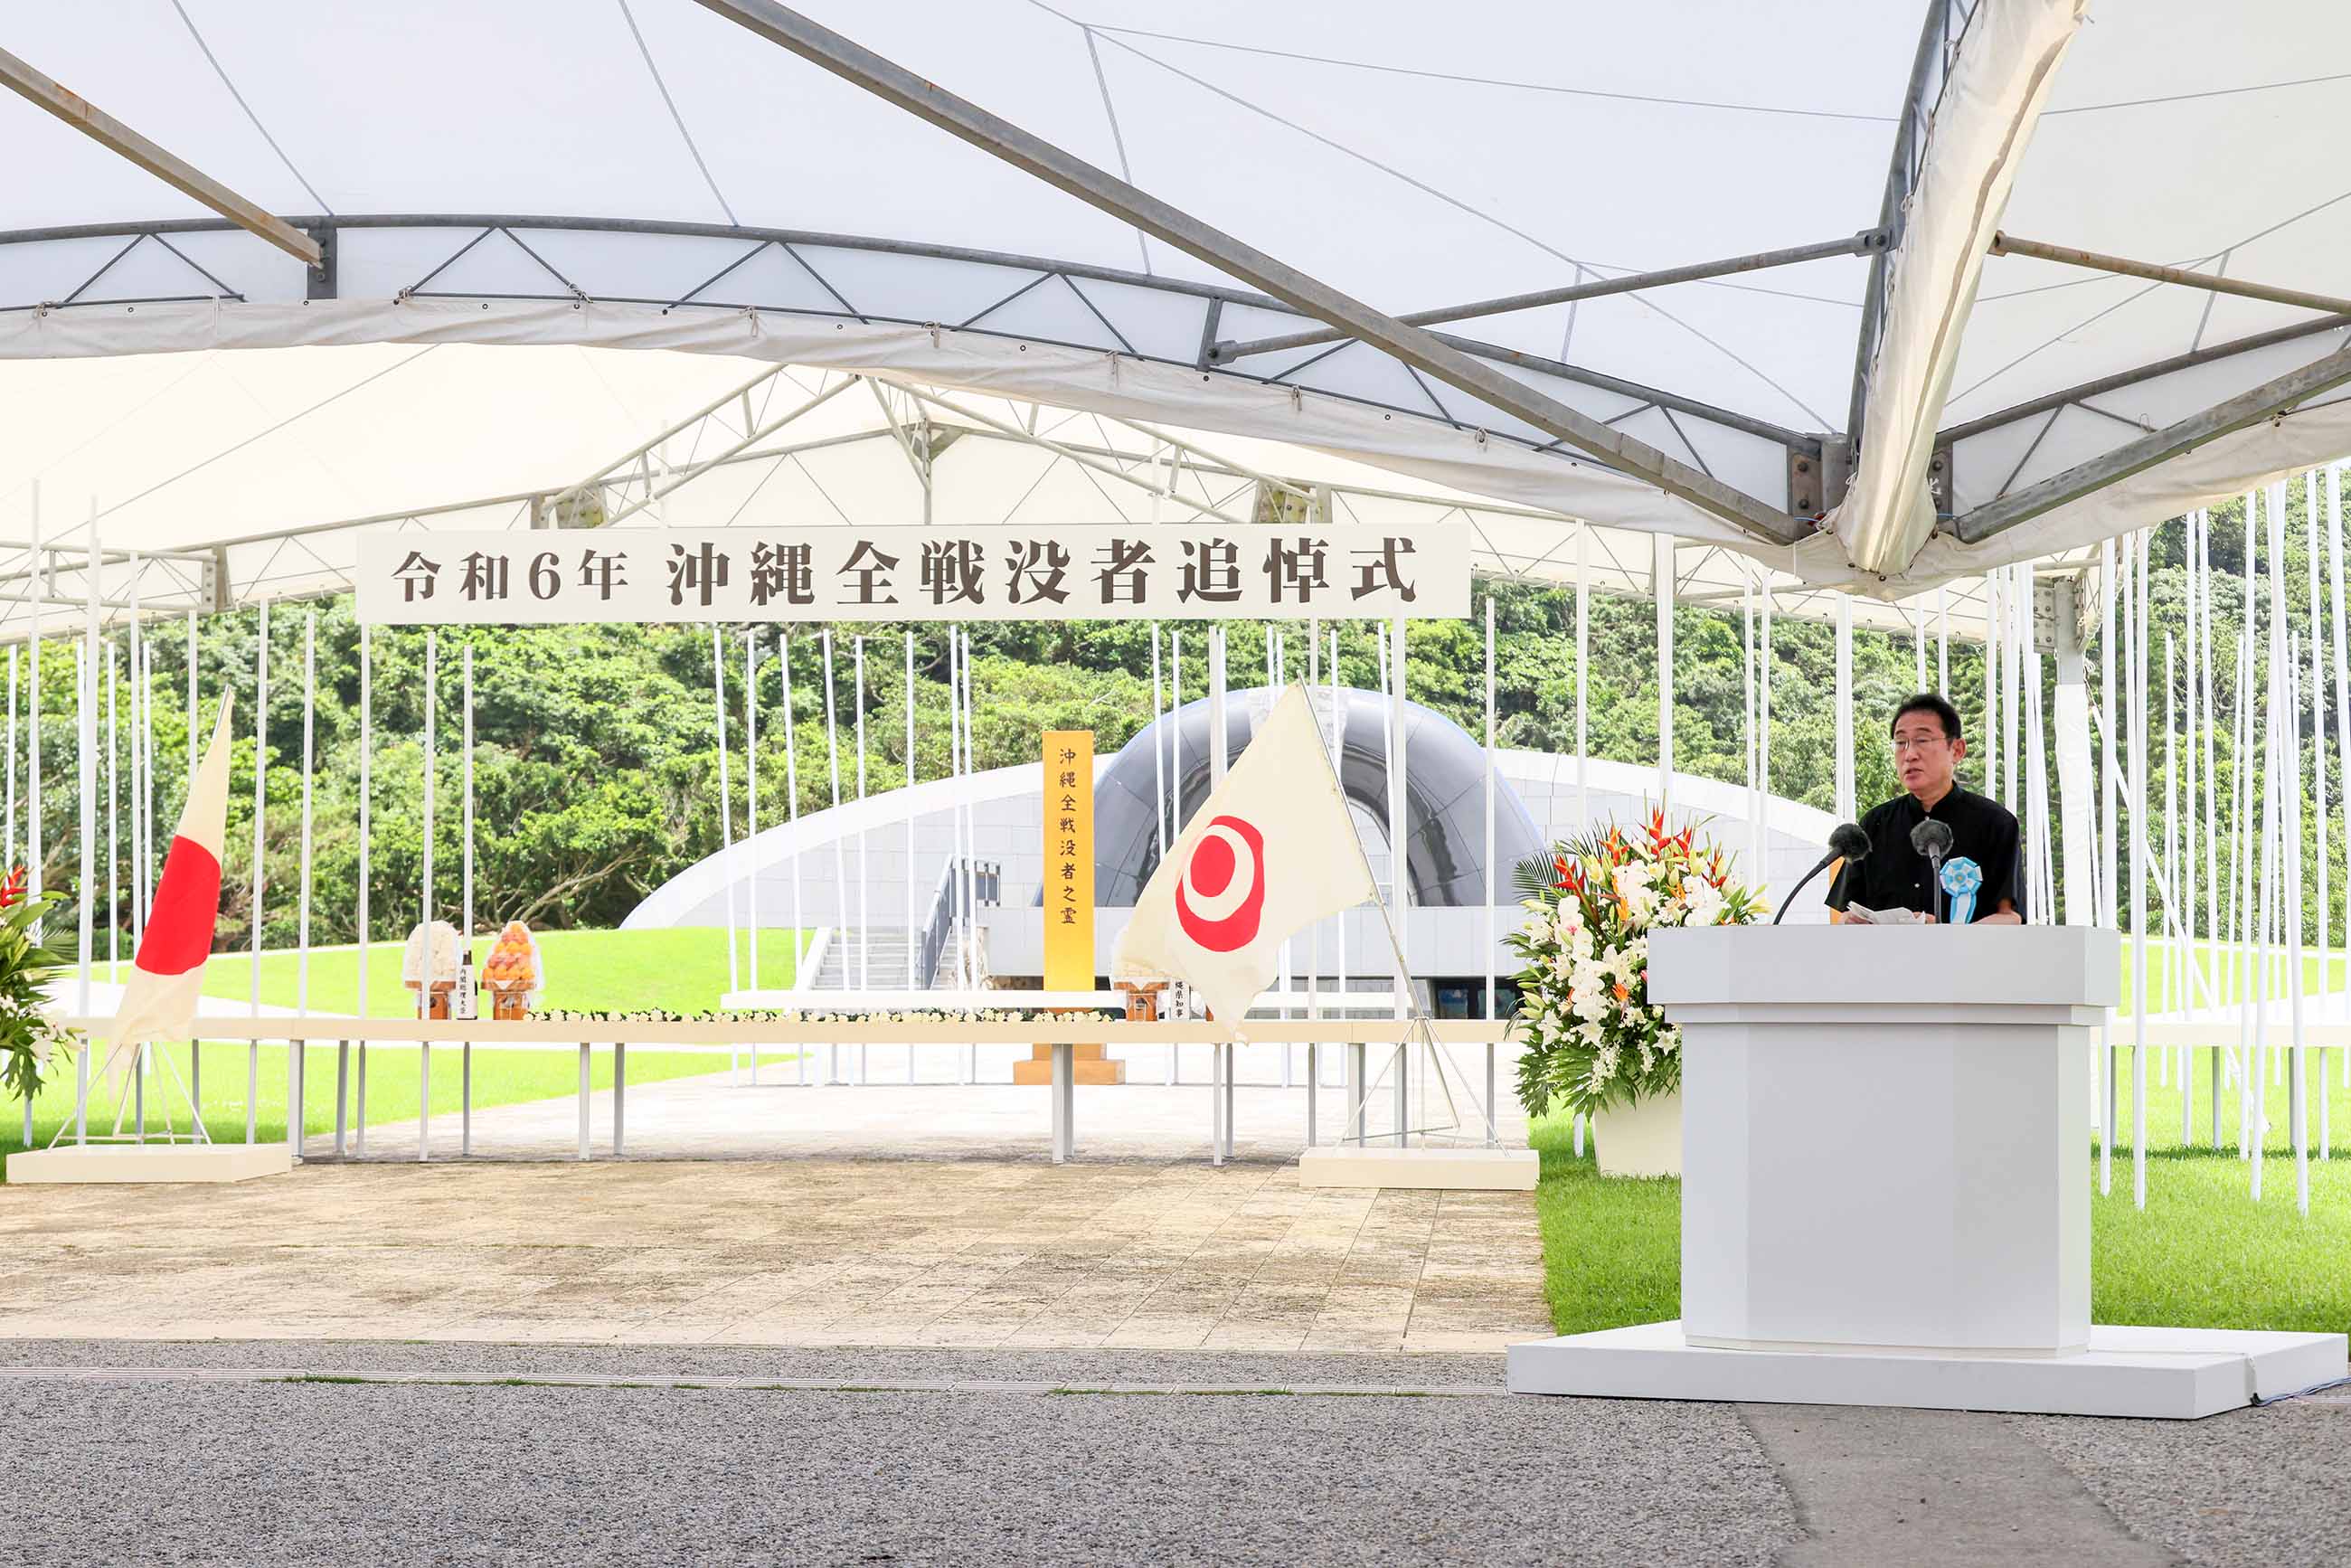 Memorial Ceremony to Commemorate the Fallen on the 79th Anniversary of the End of the Battle of Okinawa